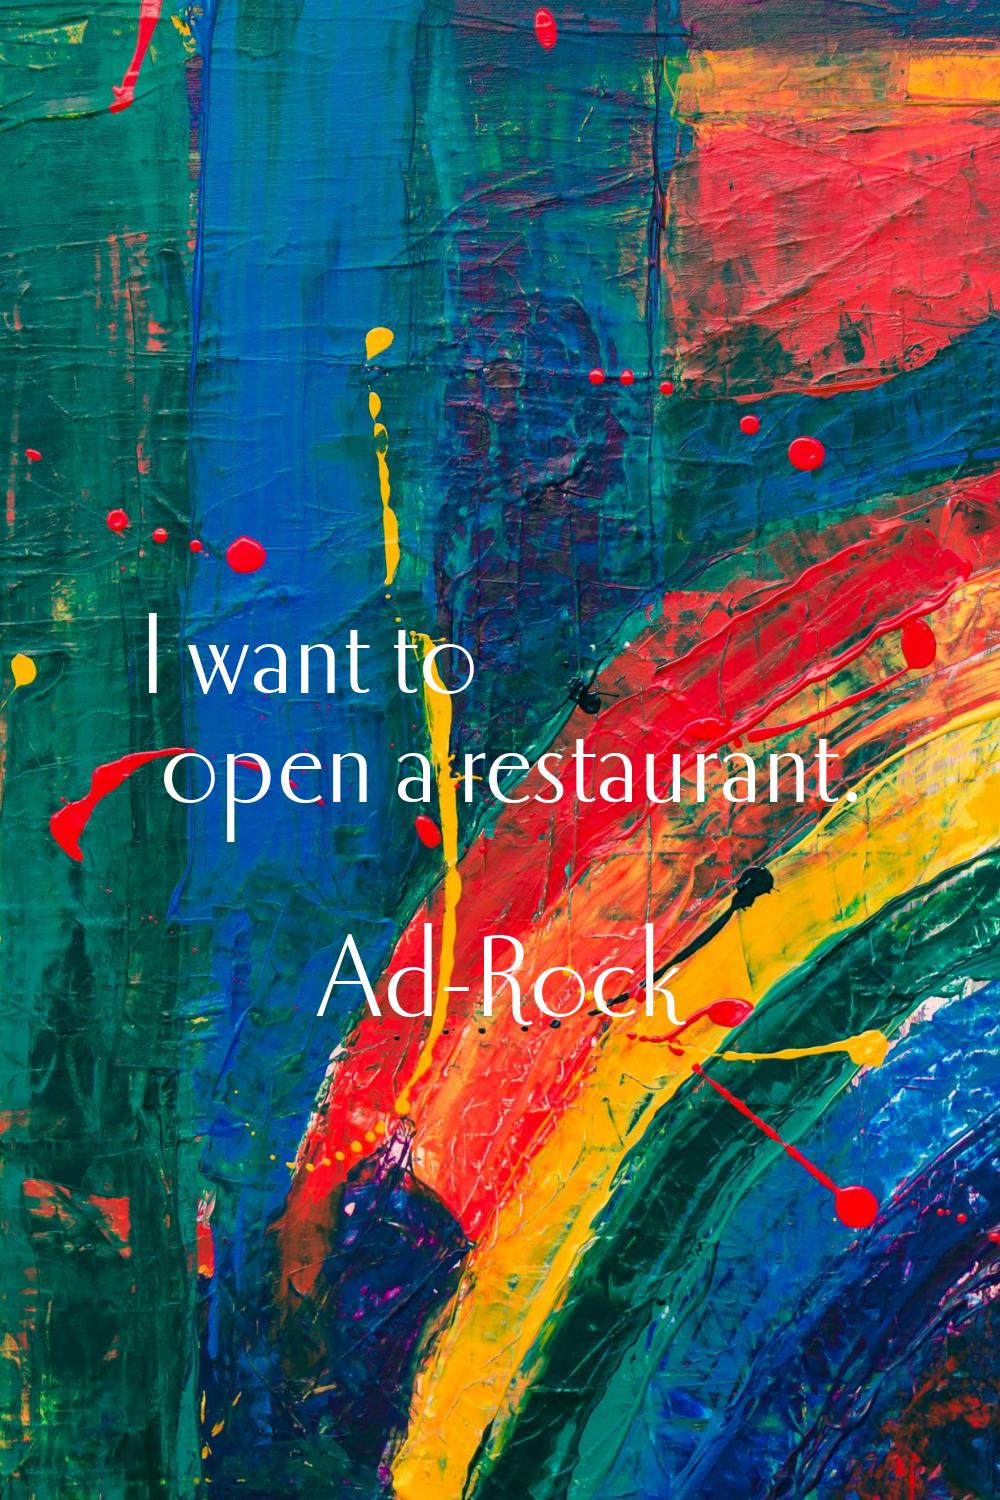 I want to open a restaurant.